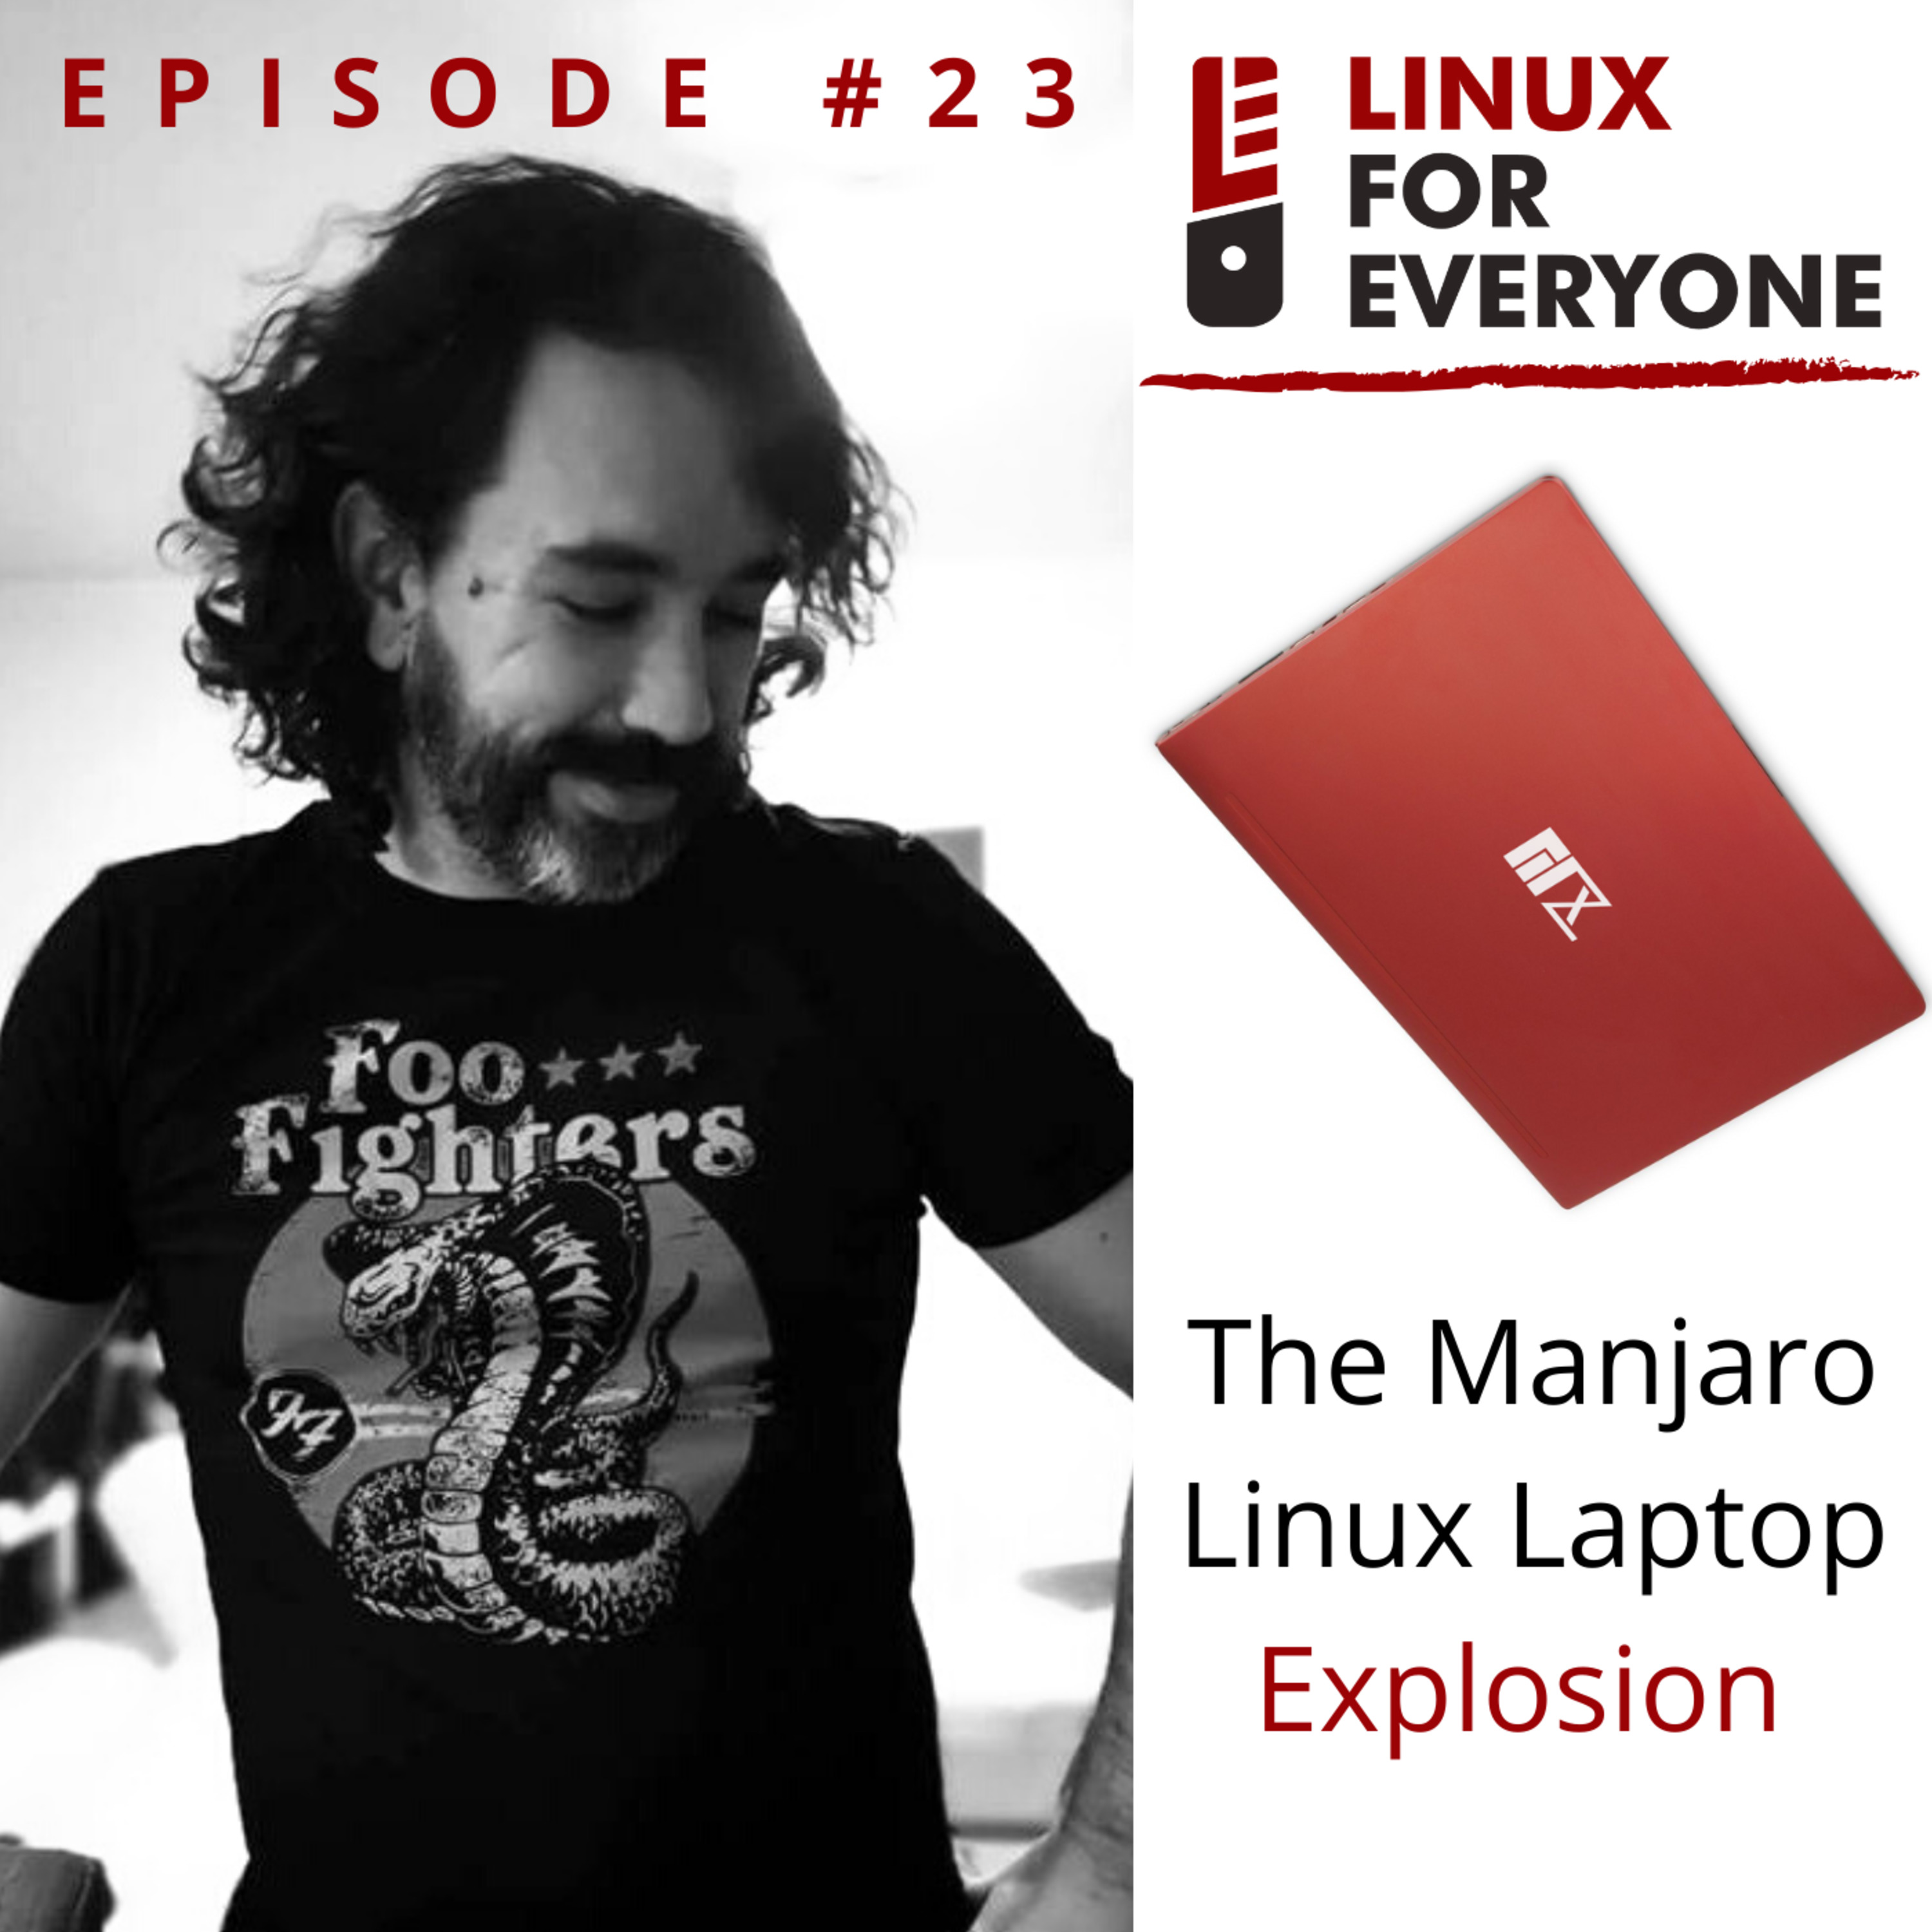 Episode 23: The Manjaro Linux Laptop Explosion (featuring Philip Müller)